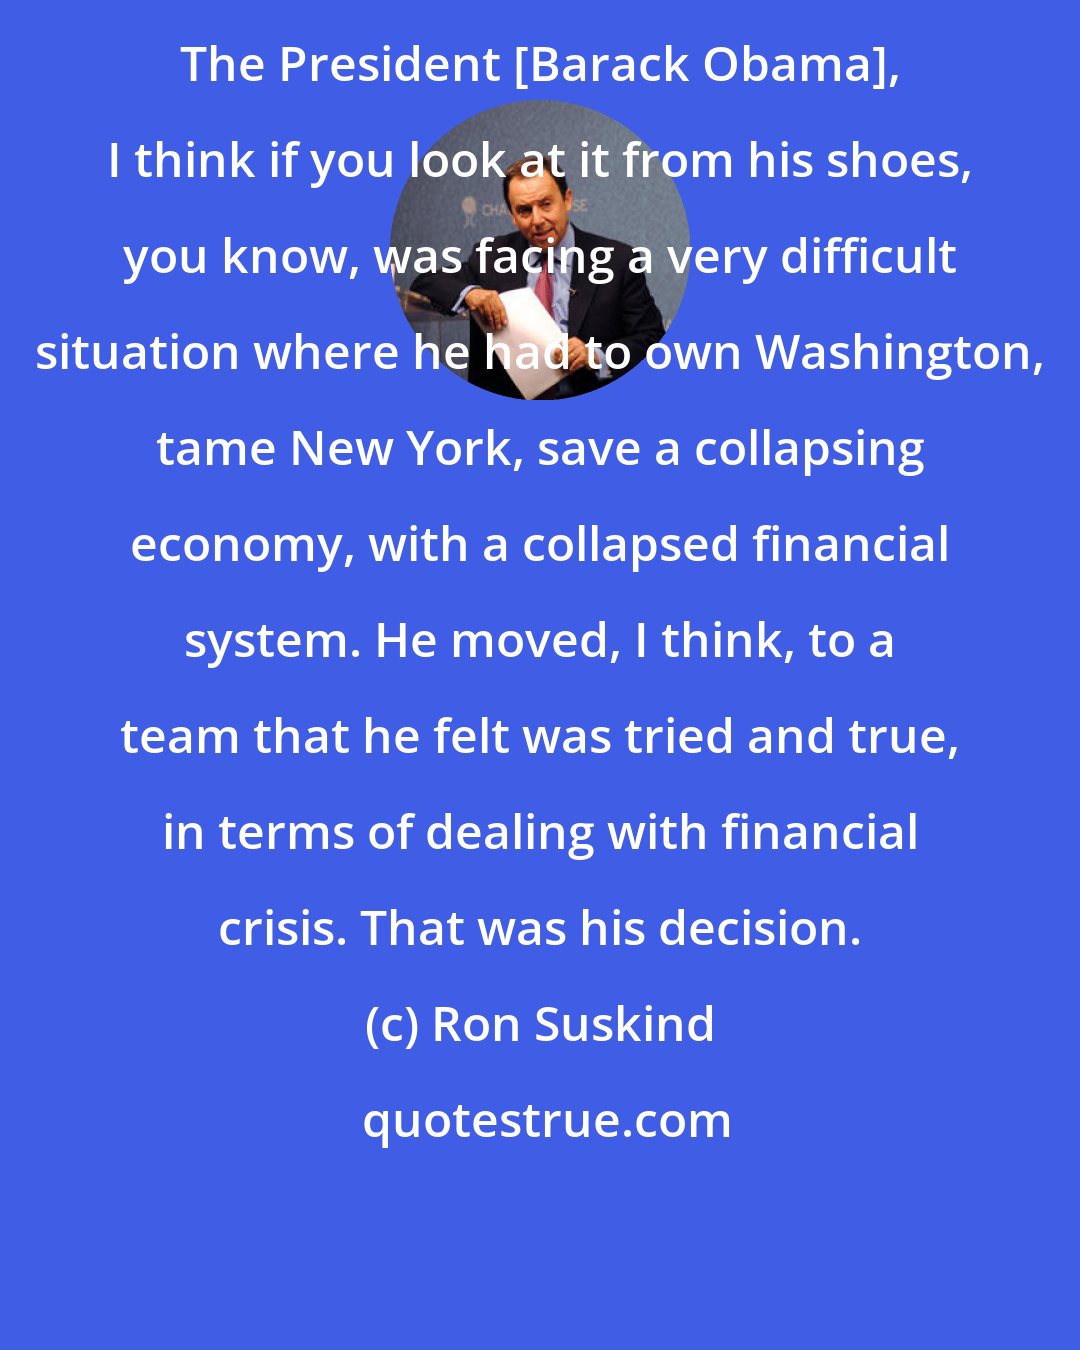 Ron Suskind: The President [Barack Obama], I think if you look at it from his shoes, you know, was facing a very difficult situation where he had to own Washington, tame New York, save a collapsing economy, with a collapsed financial system. He moved, I think, to a team that he felt was tried and true, in terms of dealing with financial crisis. That was his decision.